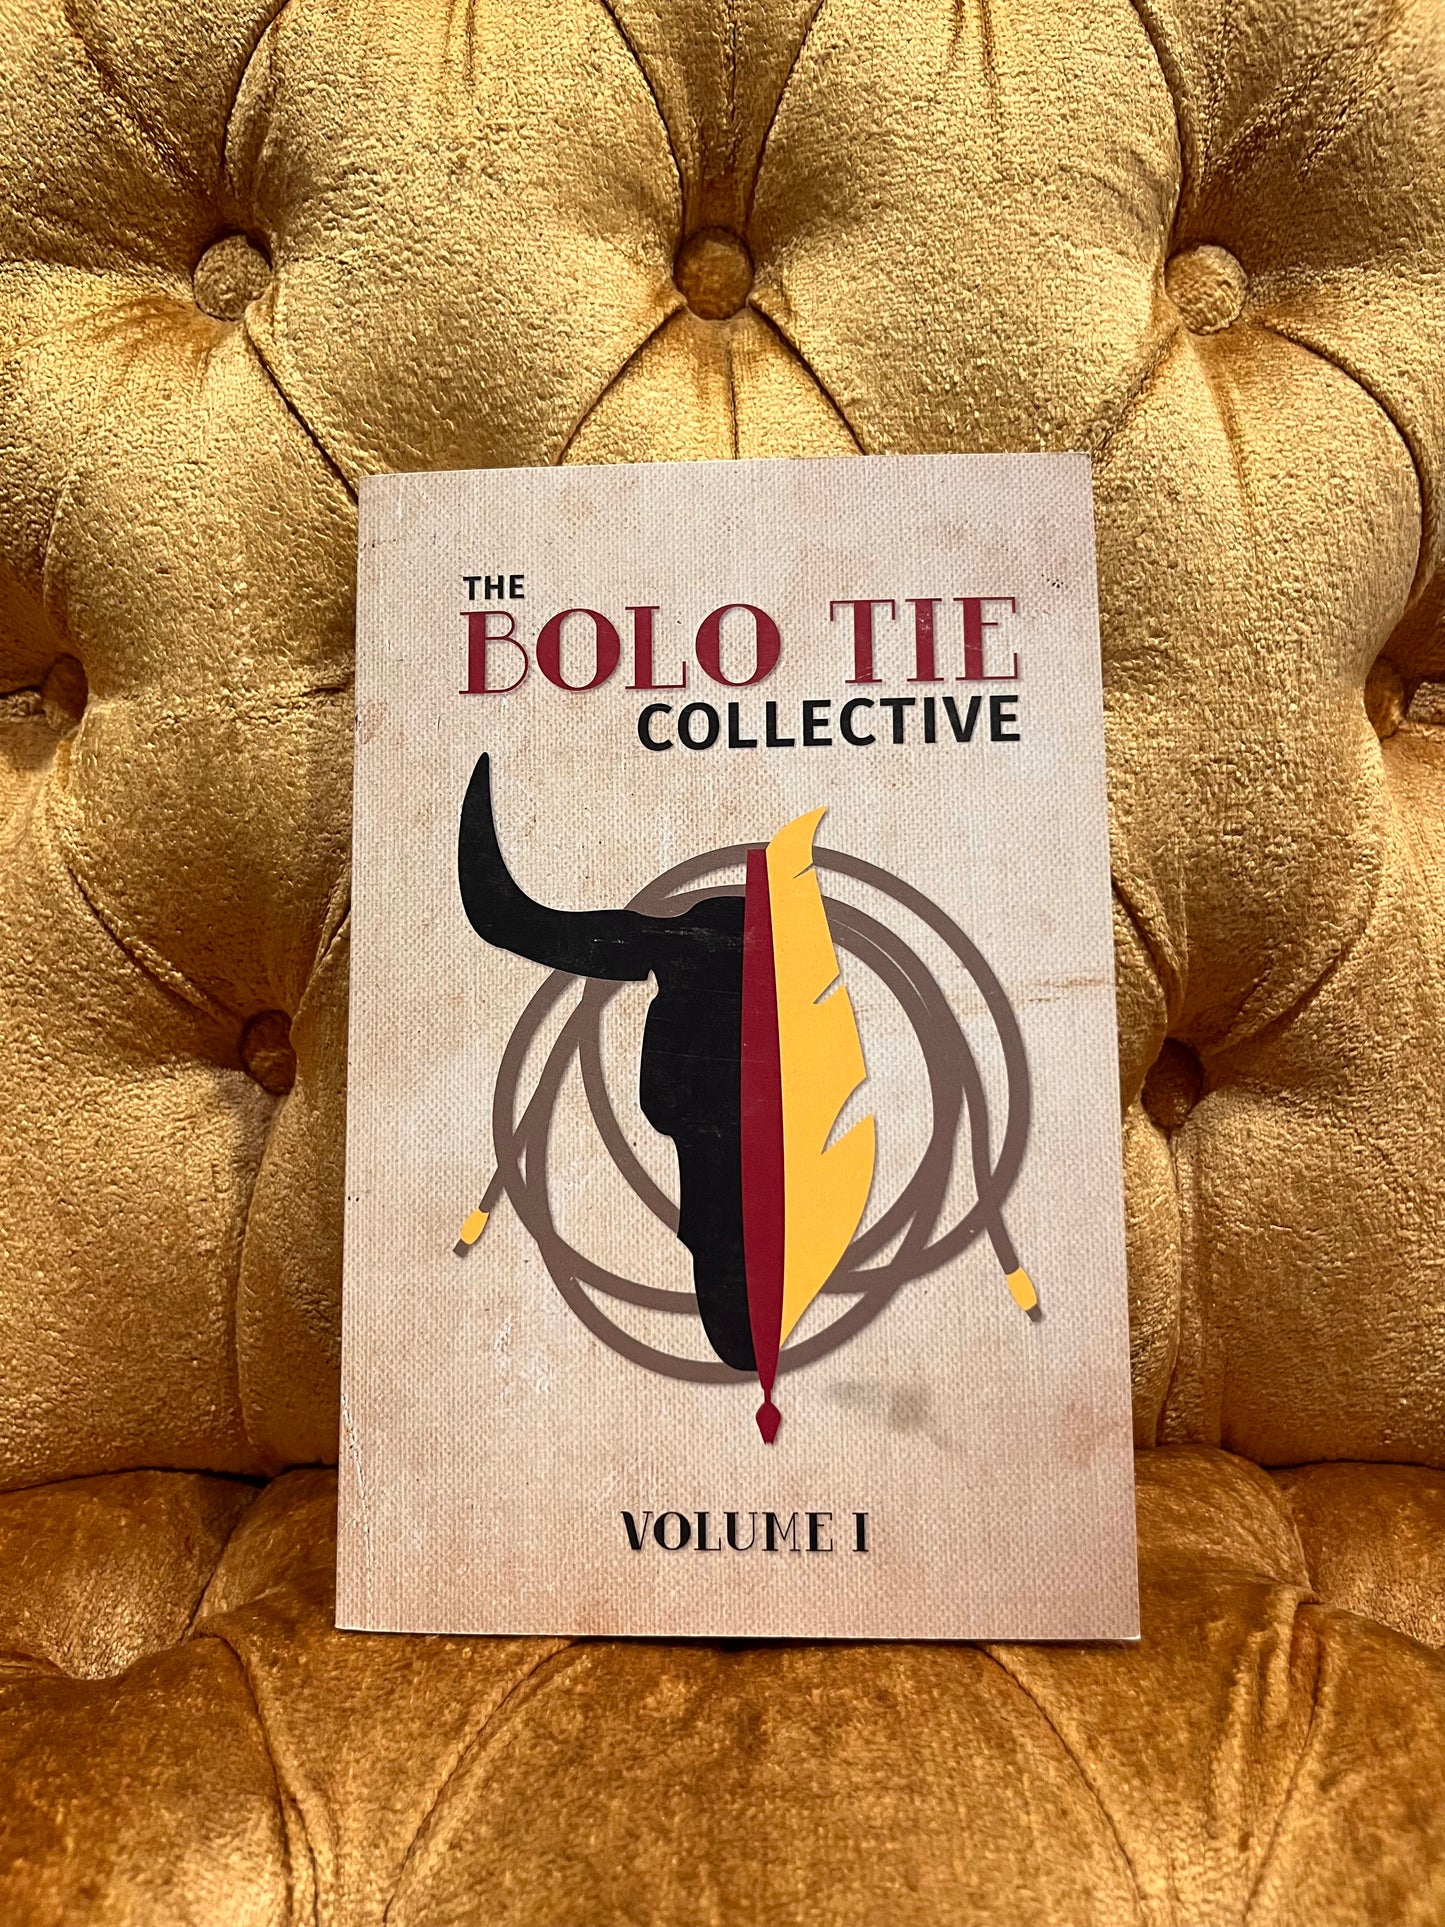 The Bolo Tie Collective Anthologies (Vol. 1-7)